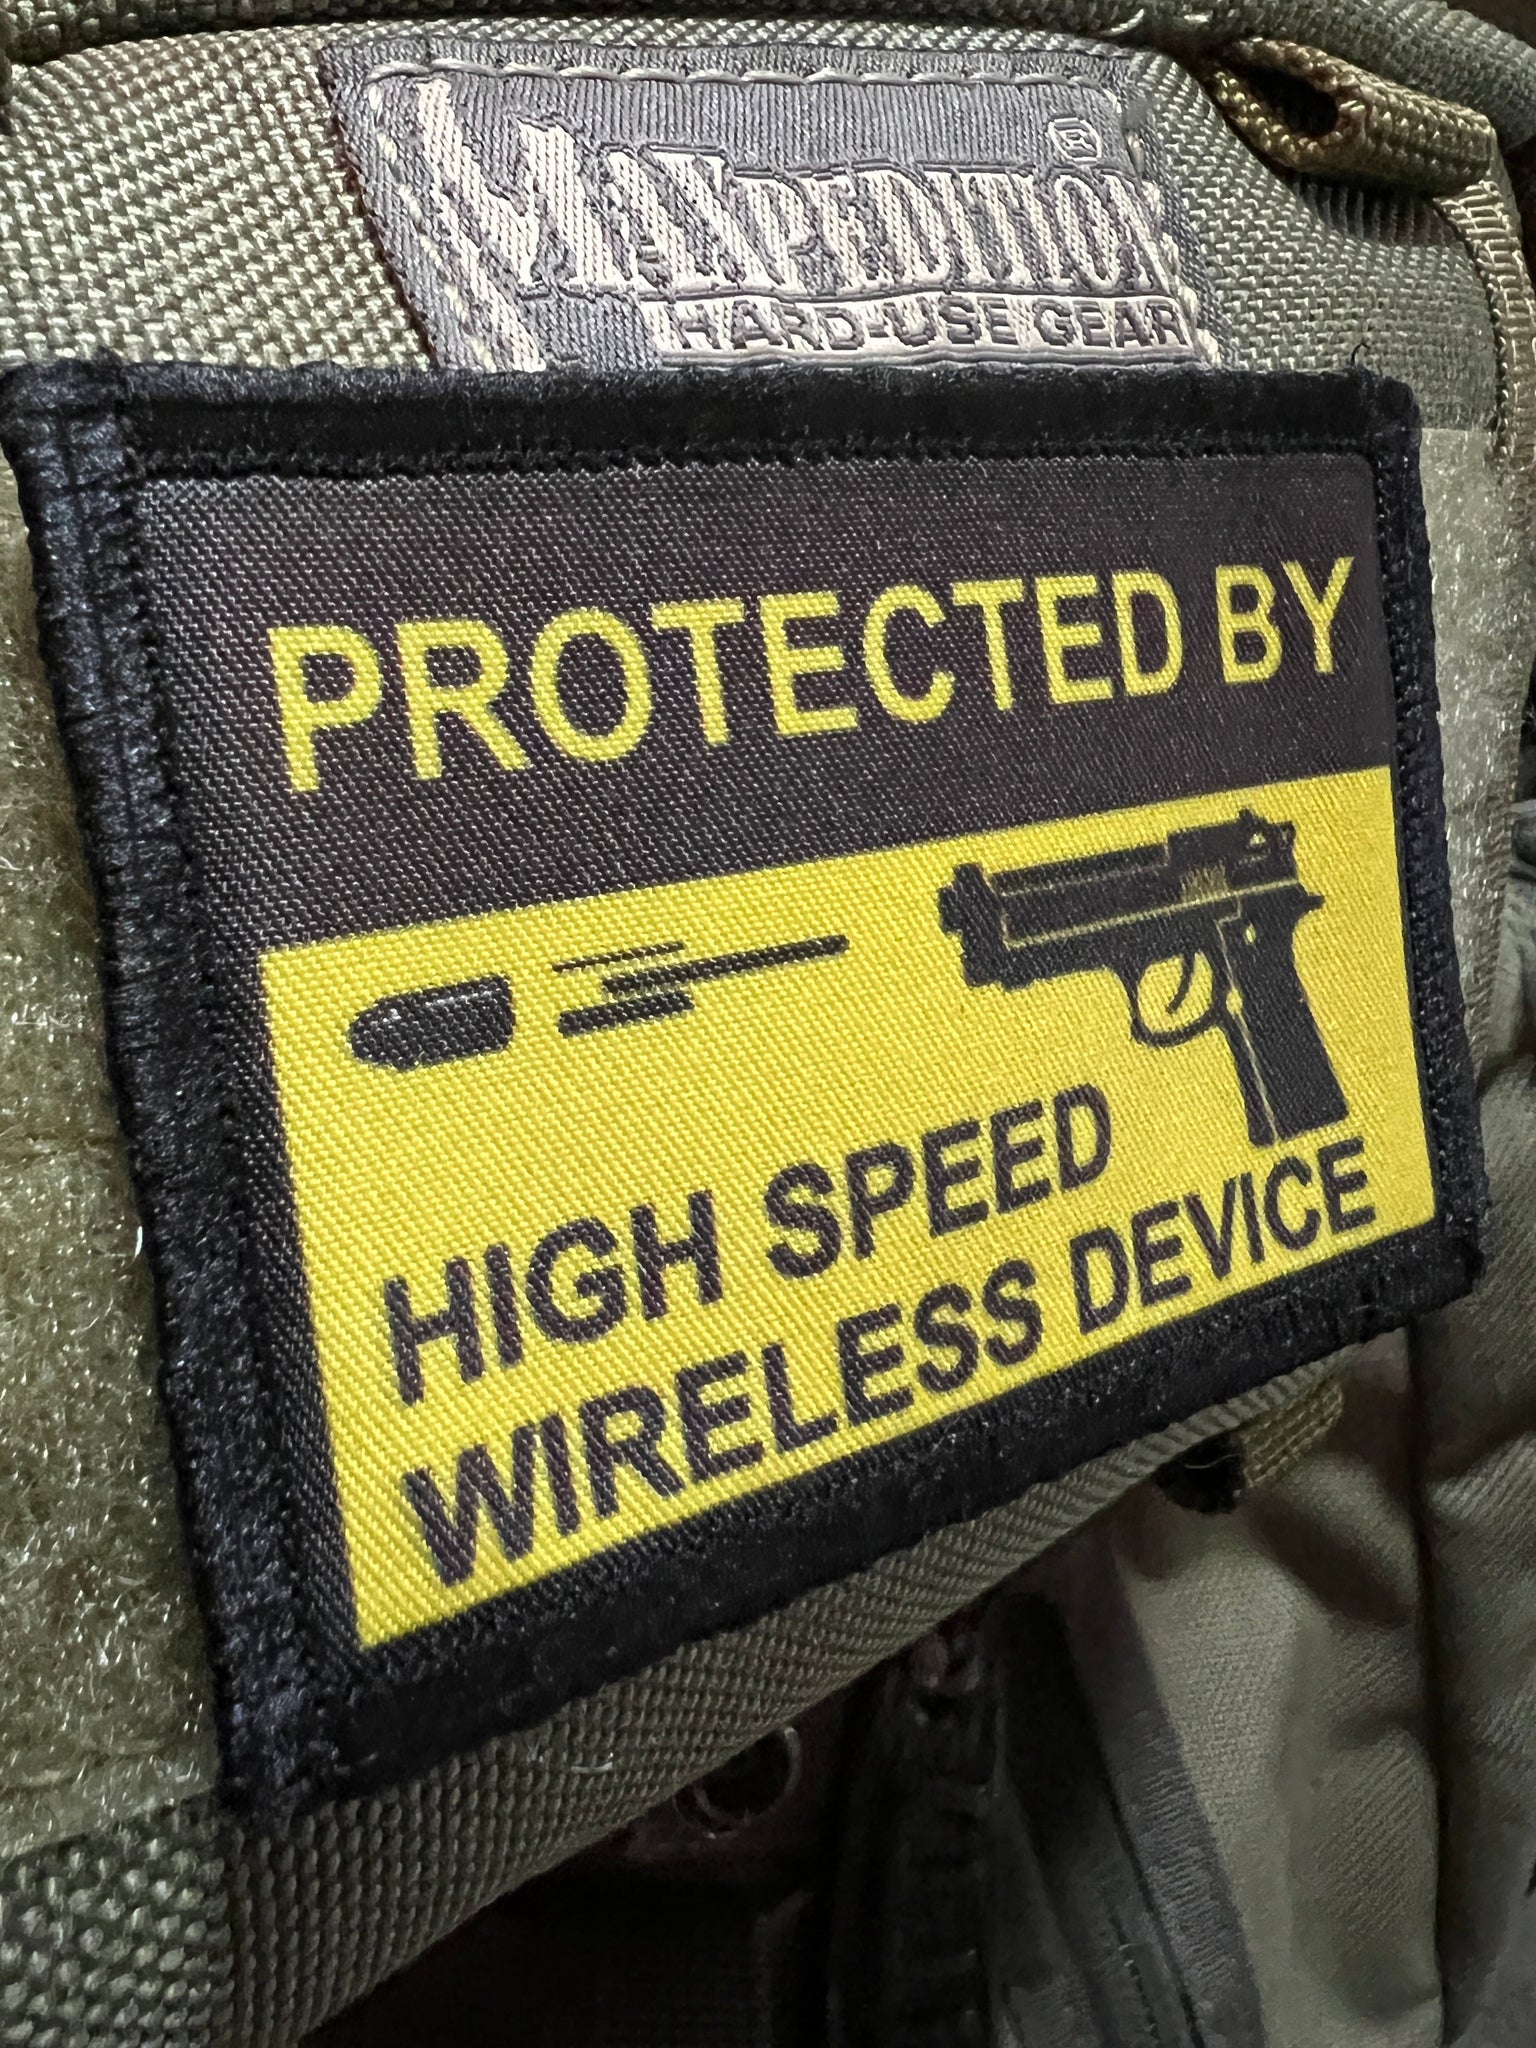 High Speed Wireless Device Morale Patch Morale Patches Redheaded T Shirts 